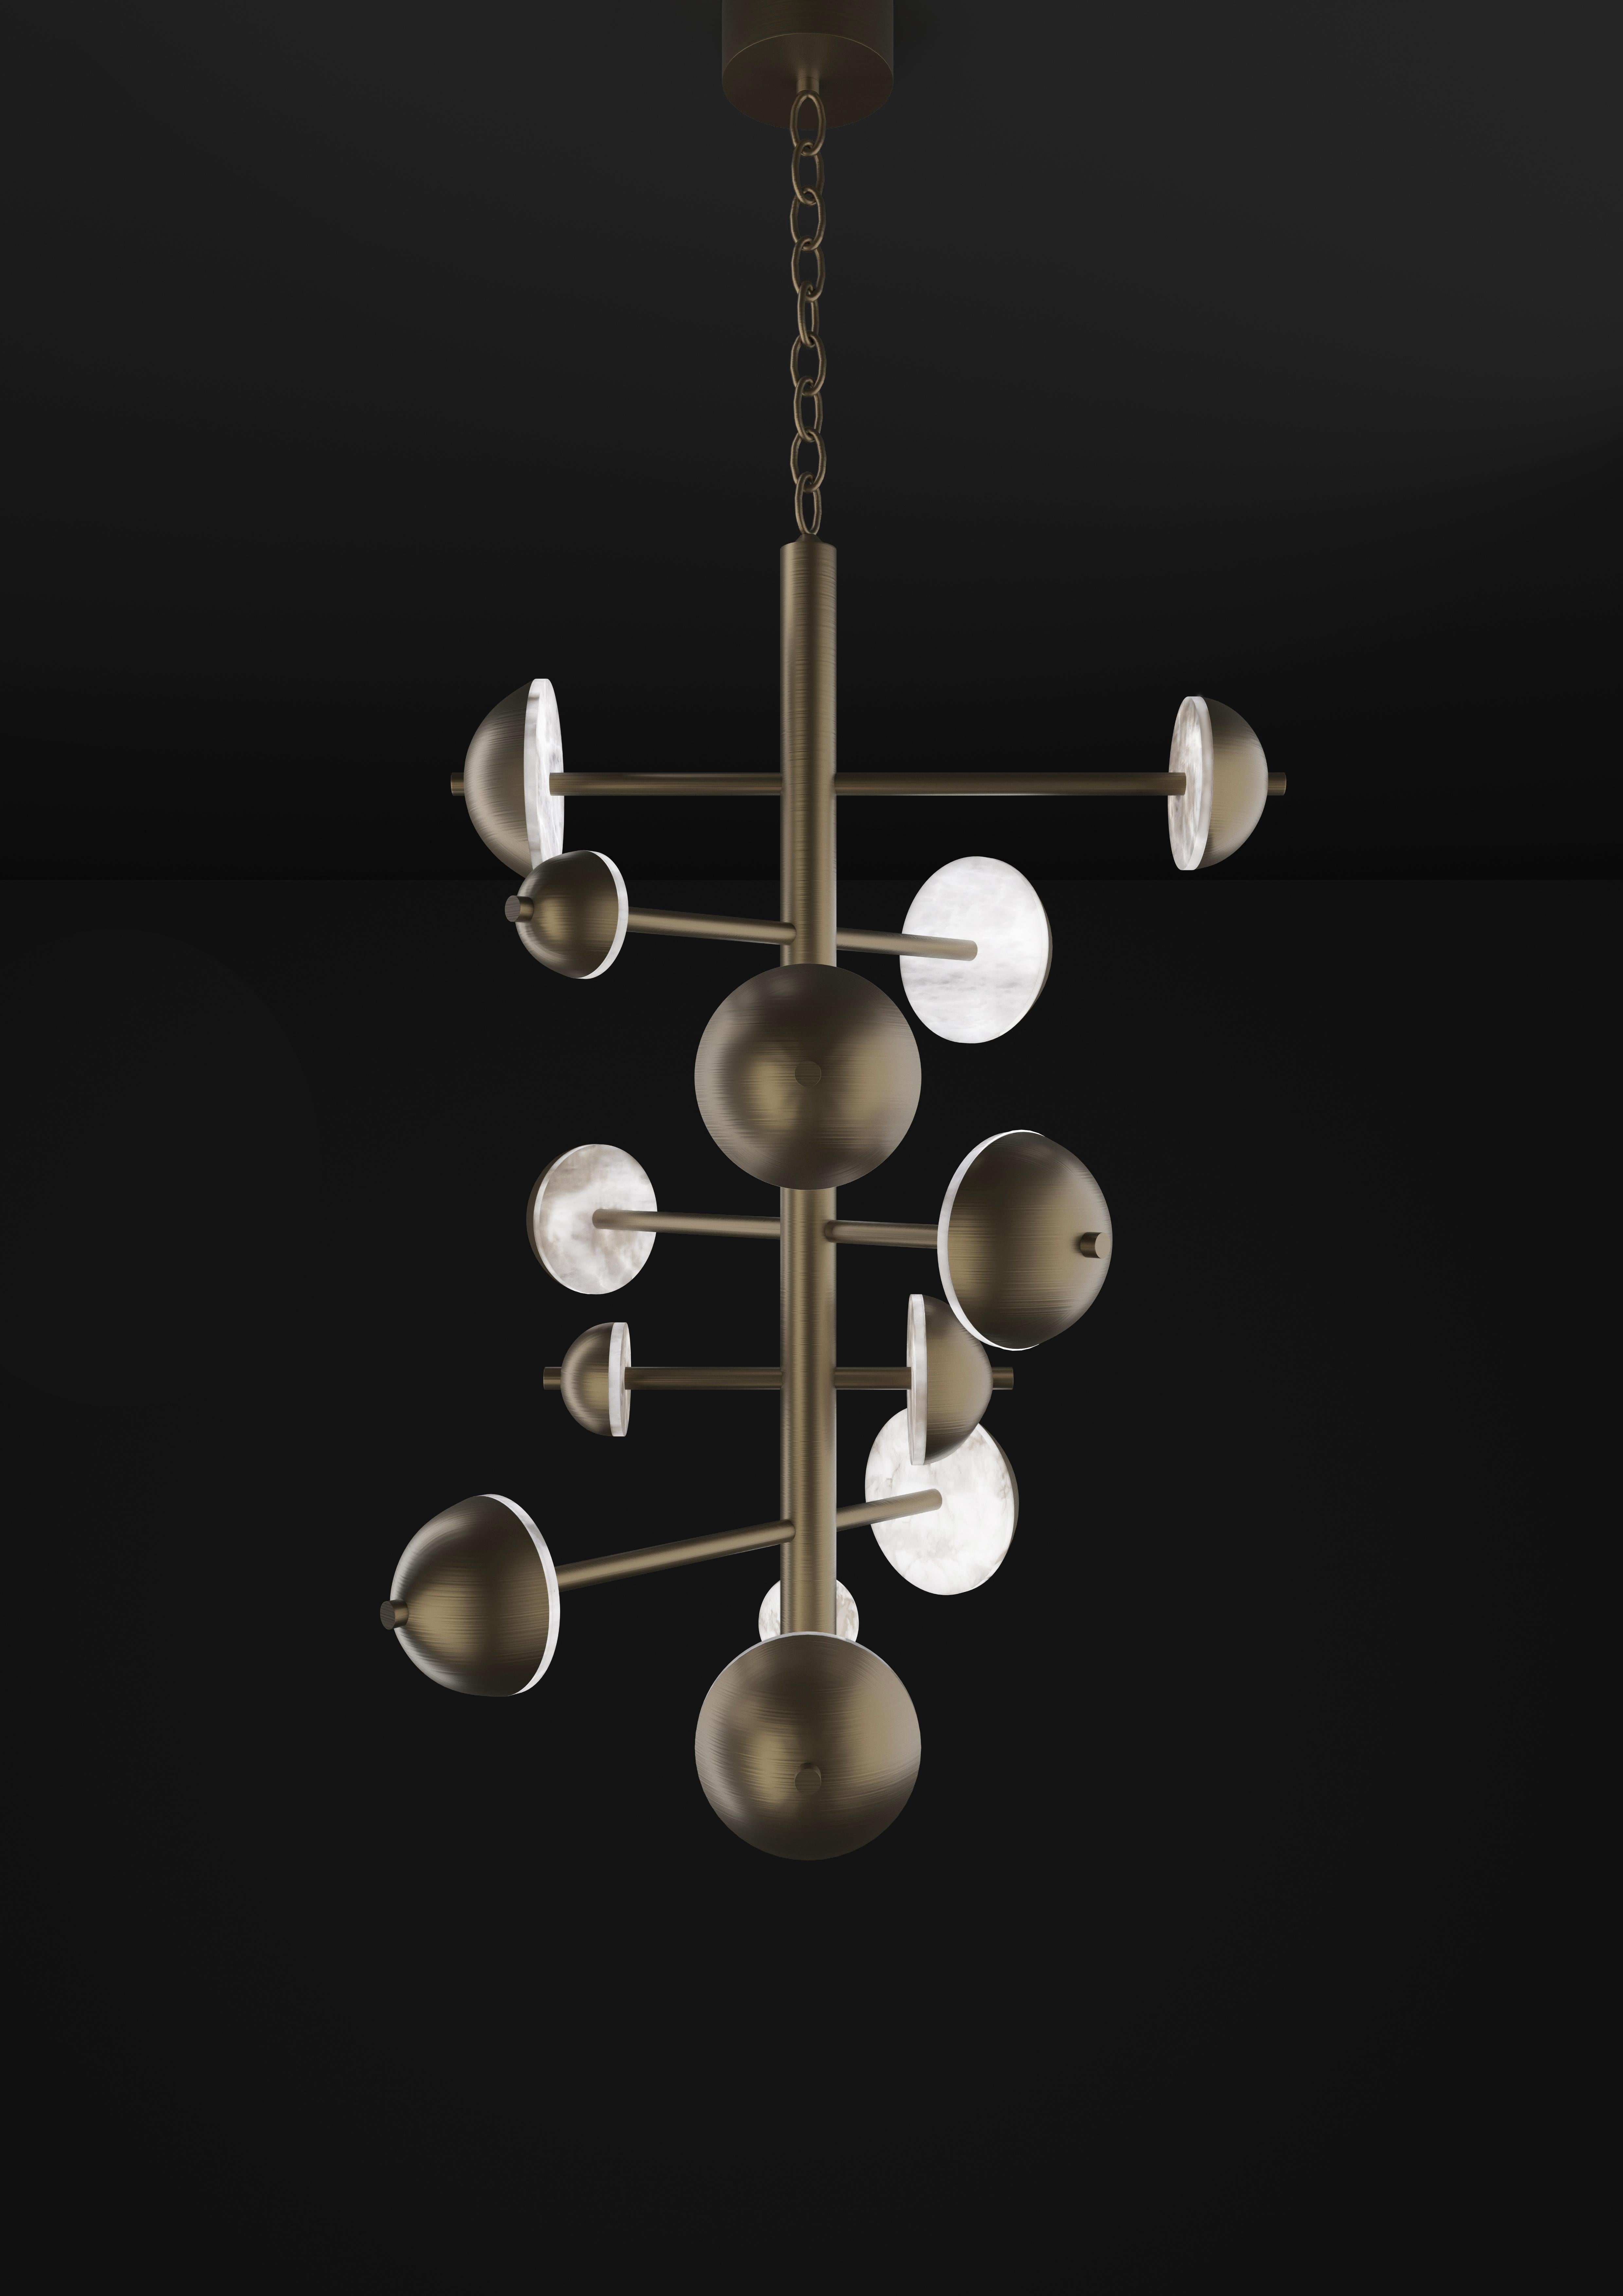 Ares Brushed Burnished Metal Chandelier by Alabastro Italiano
Dimensions: D 74,5 x W 73 x H 110 cm.
Materials: White alabaster and metal.

Available in different finishes: Shiny Silver, Bronze, Brushed Brass, Ruggine of Florence, Brushed Burnished,